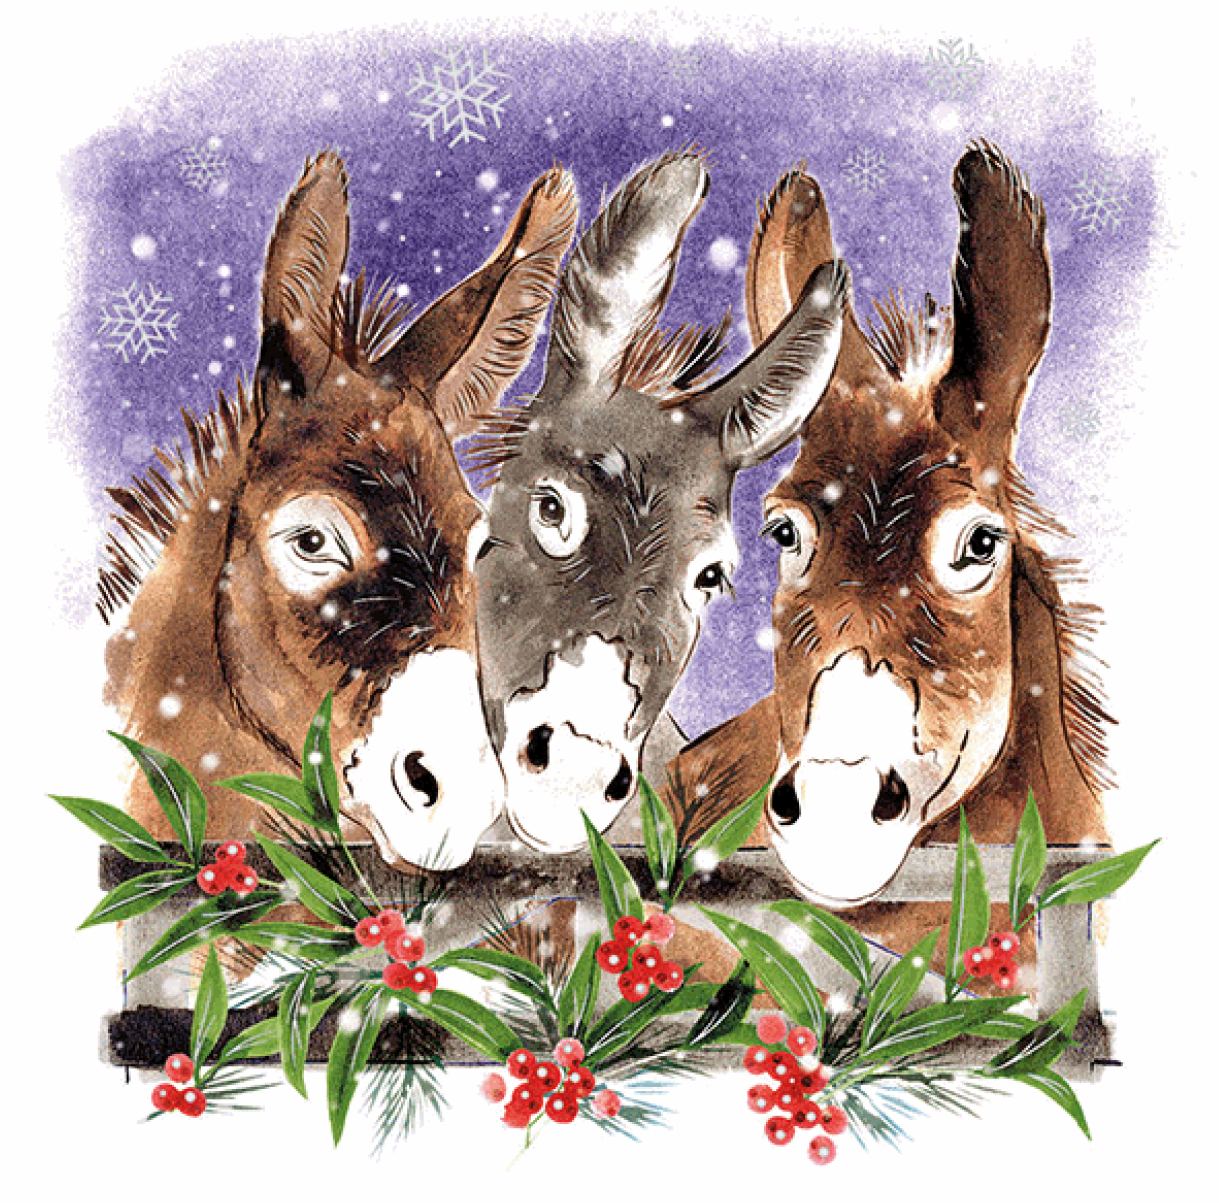 Donkey Friends - Christmas Card (10 pack)